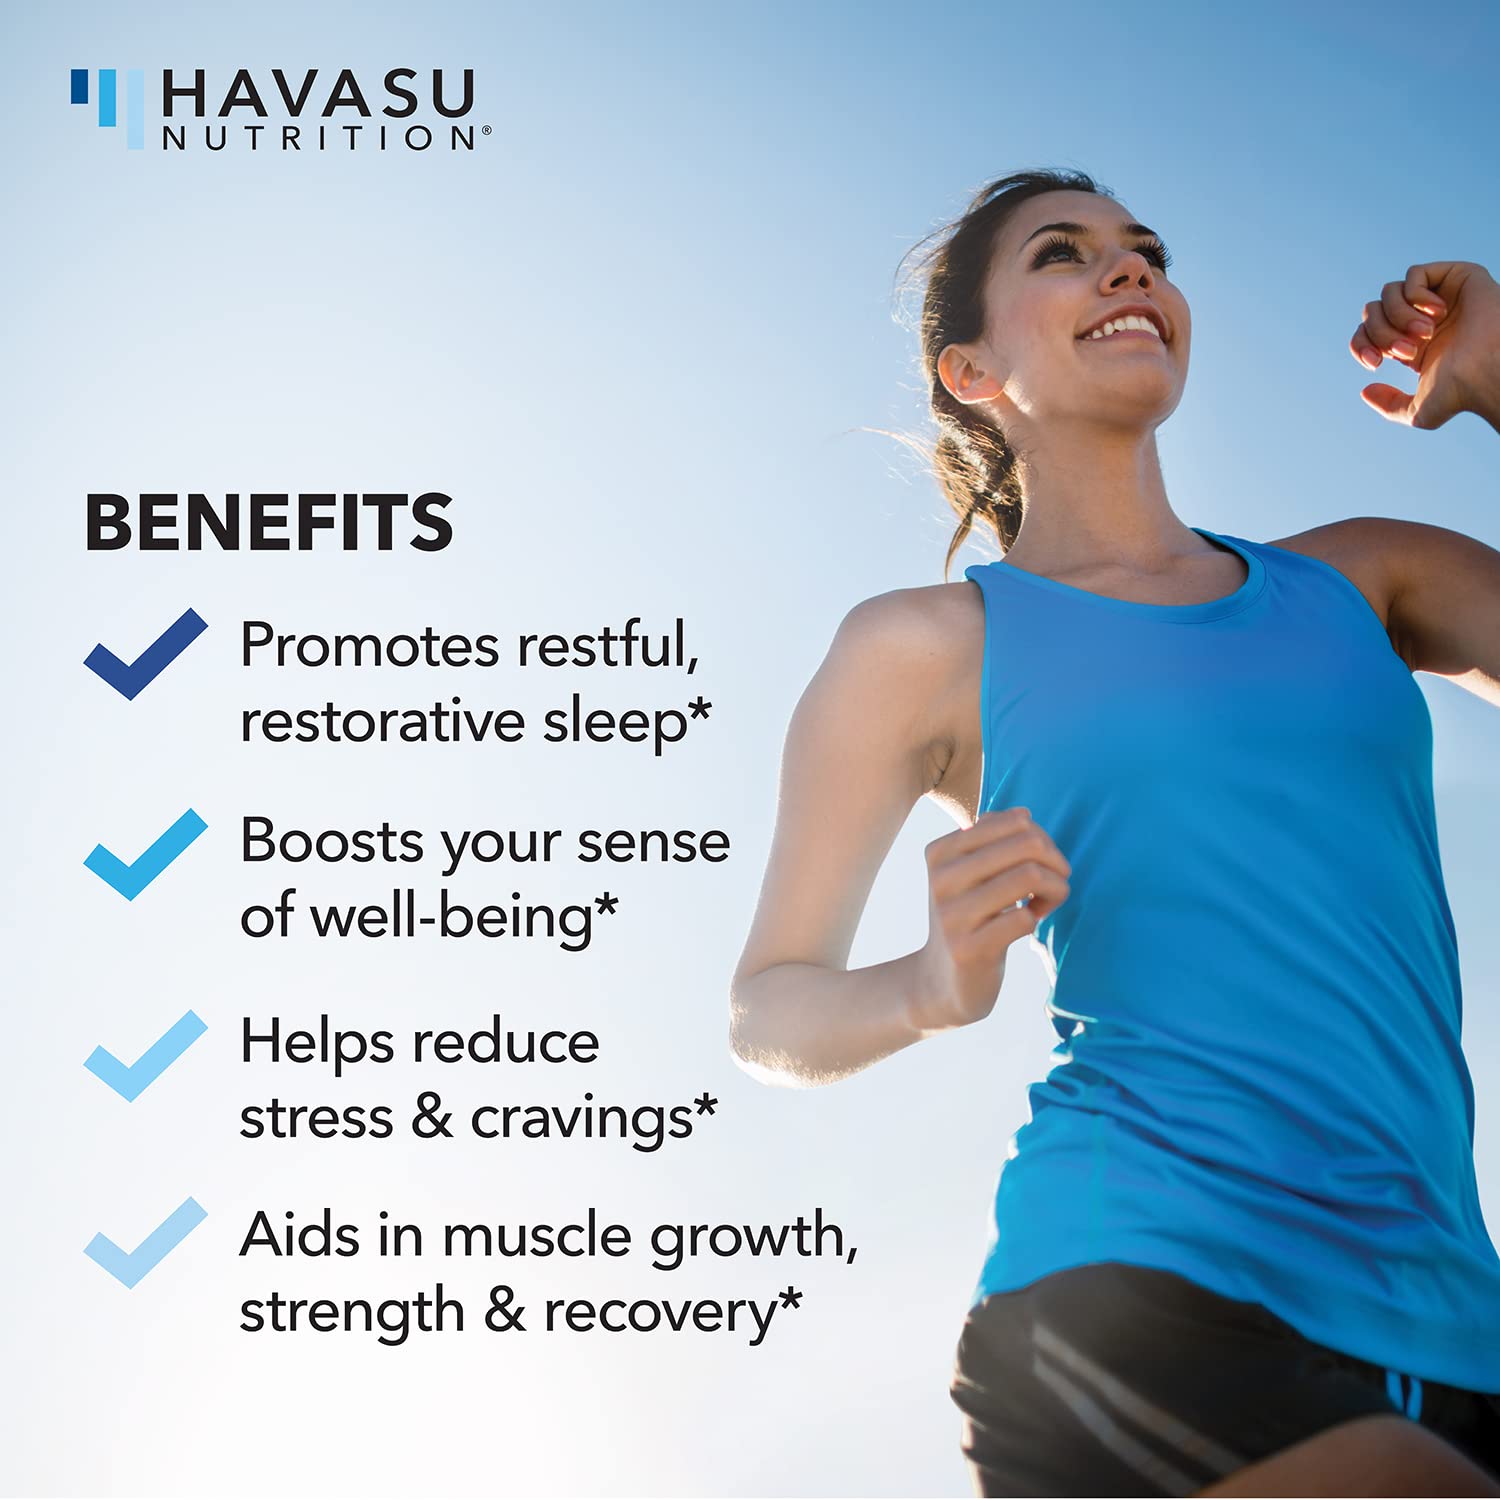 HAVASU NUTRITION Stress Relief and Weight Loss Go Hand in Hand When Taking Night Time Fat Burner for Women and Ashwagandha Gummies: A 2-in-1!